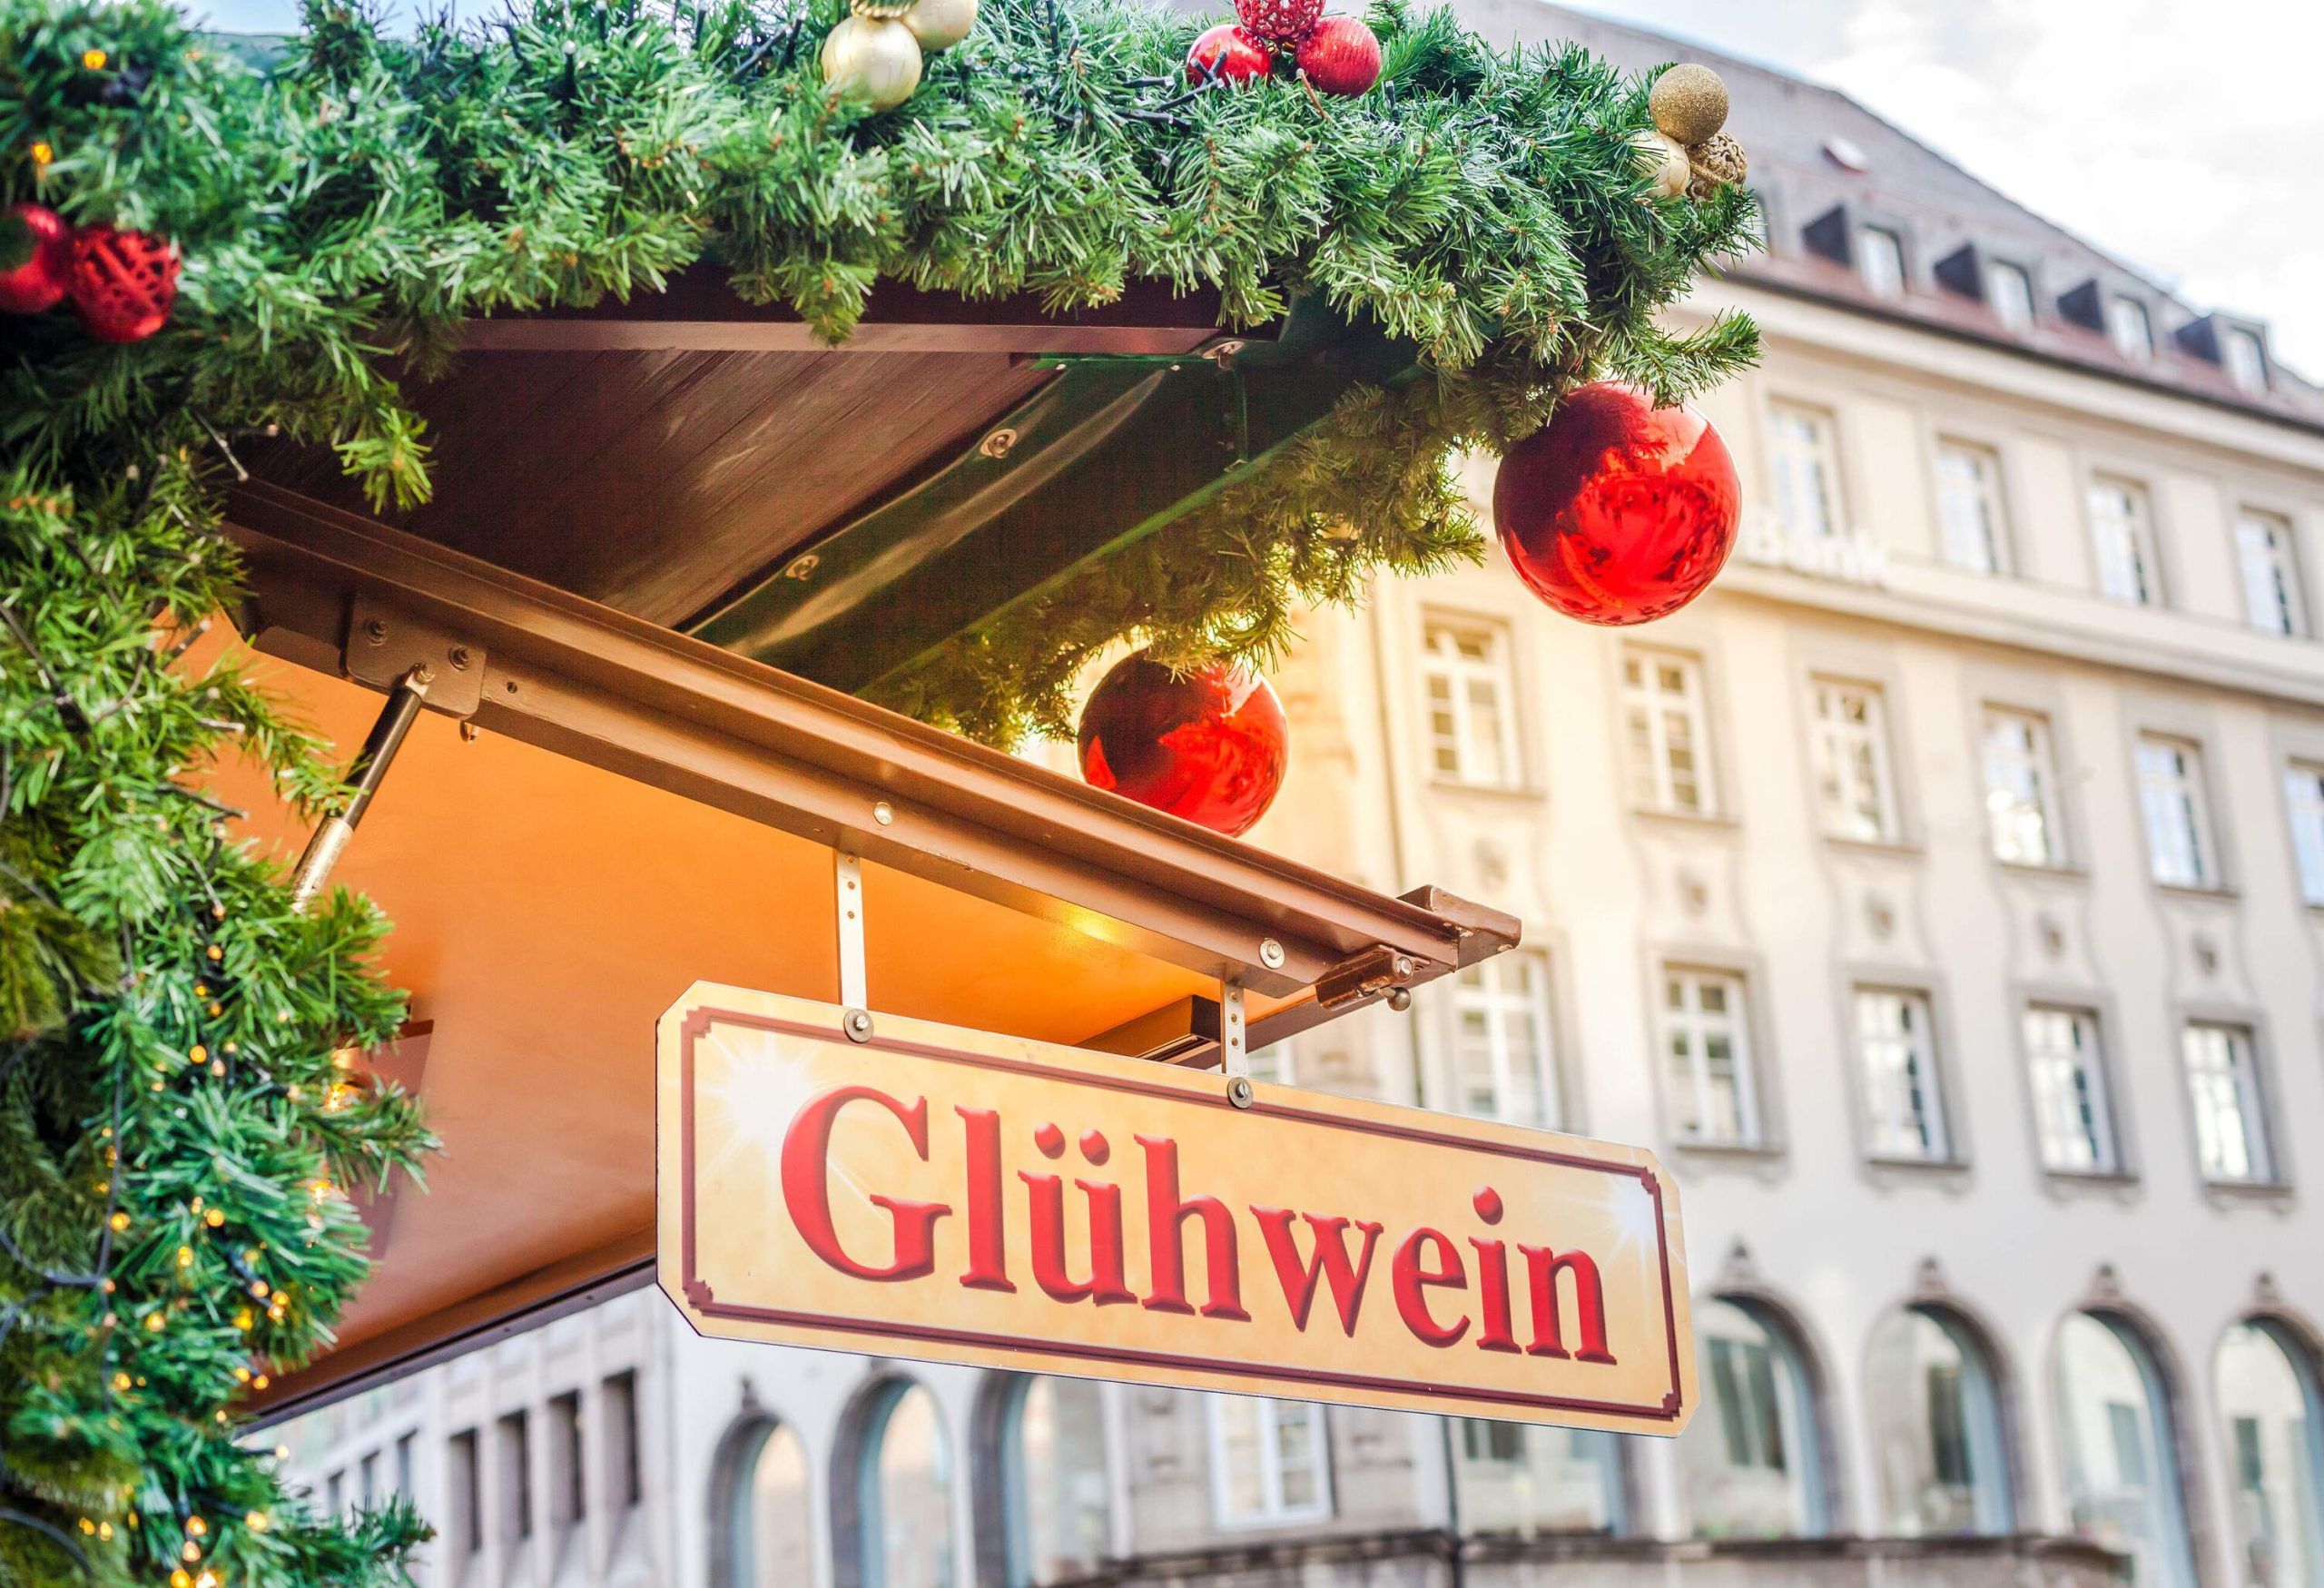 A gold-plated sign board reading "Glühwein" attached to the roof decorated with Christmas decorations and a view of an old building in the background.